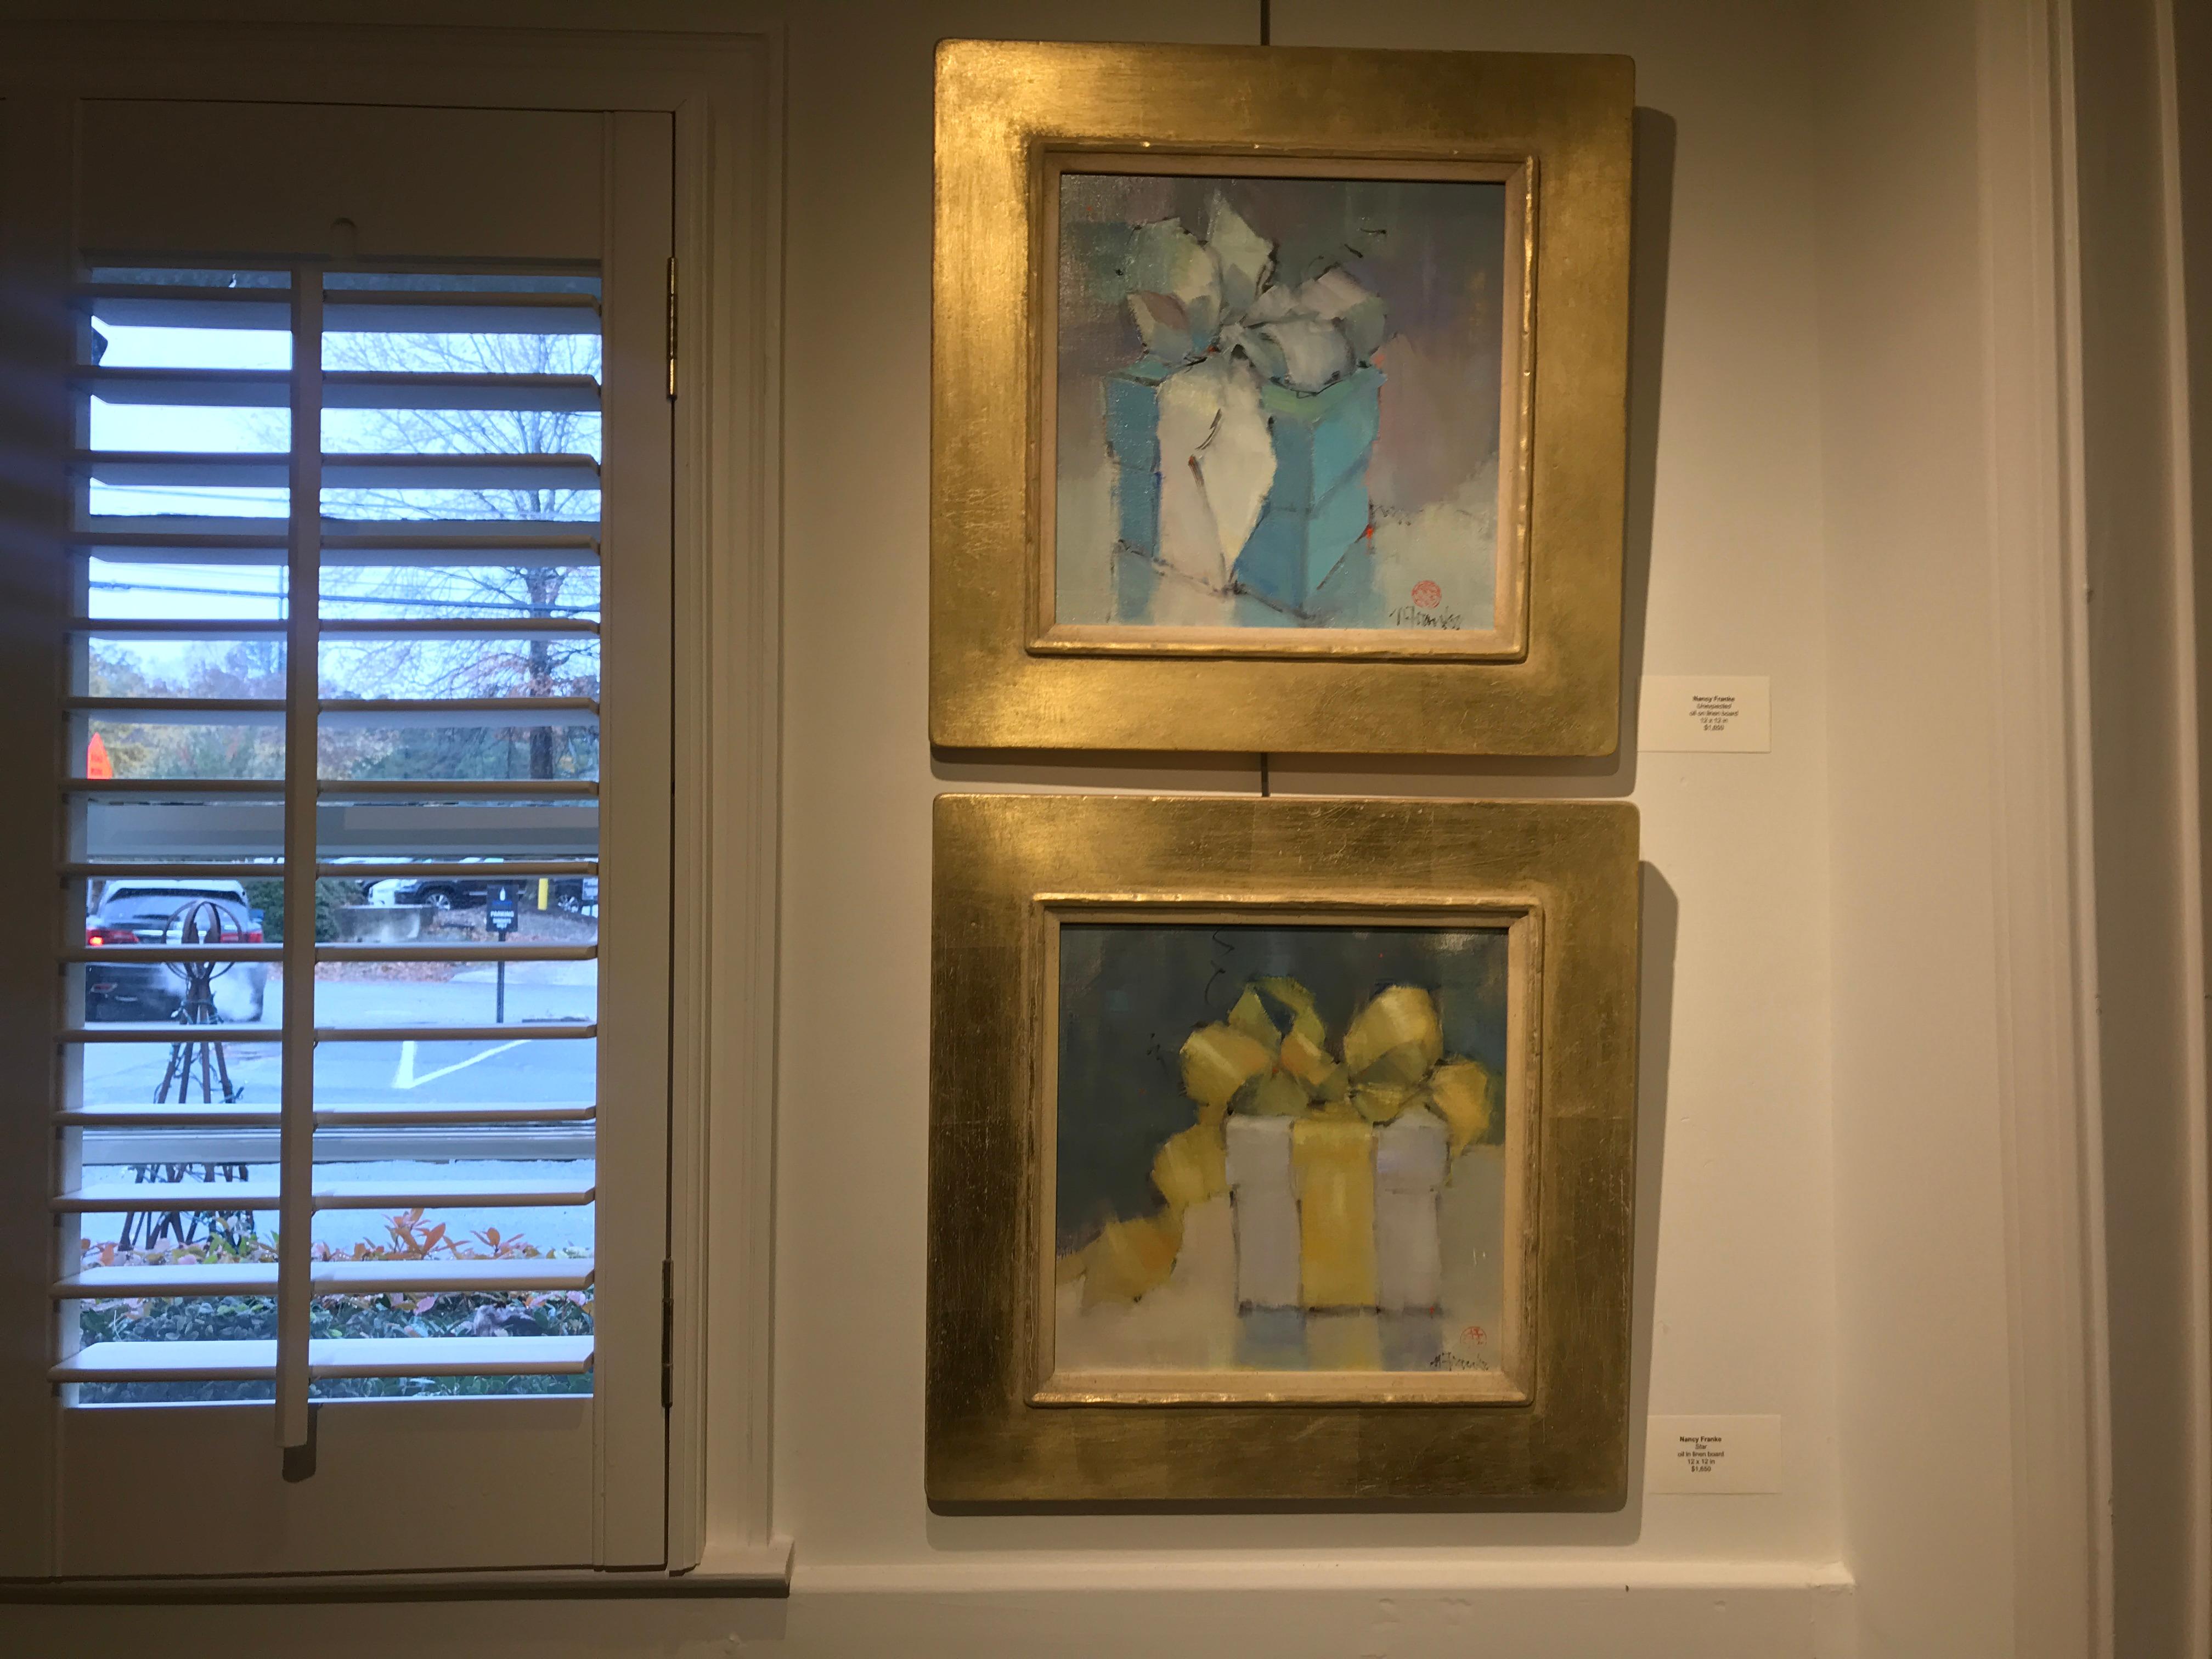 'Unexpected' is a small framed Impressionist oil on linen board painting created by American artist Nancy Franke in 2018. Set inside a handmade frame finished with 14k gold, the painting depicts a blue gift-wrapped box adorned with a delicate white